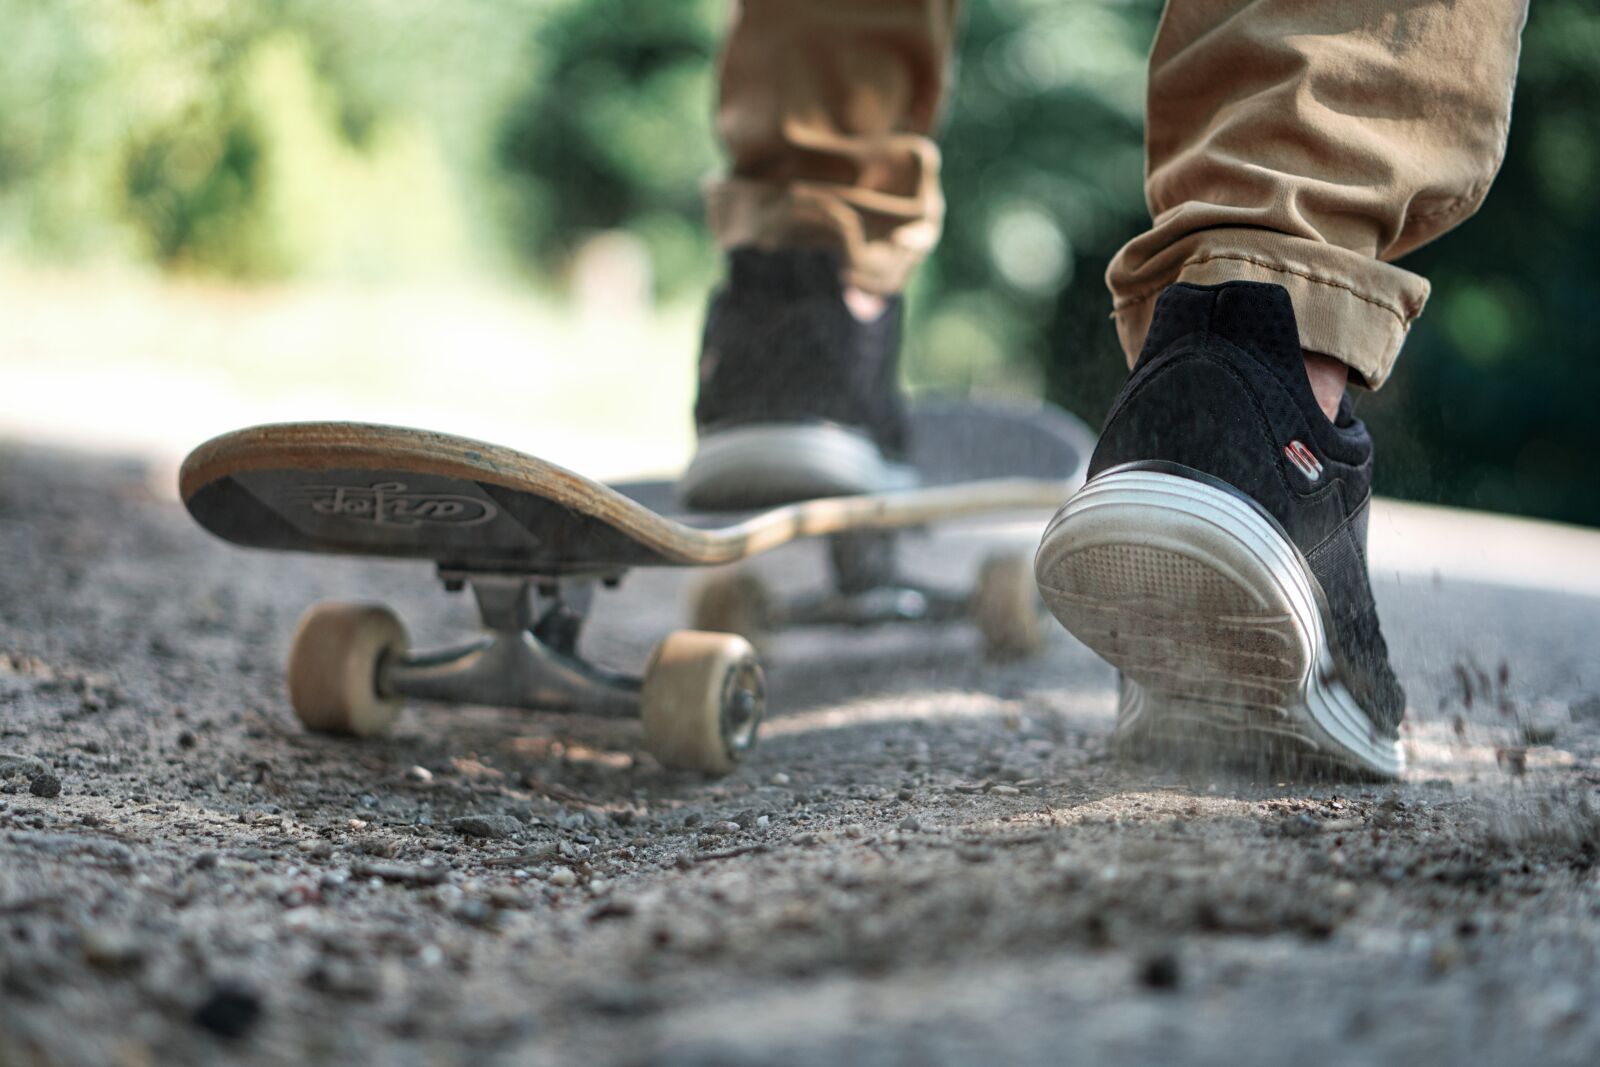 Sony a6400 sample photo. Skateboard, shoes, active photography